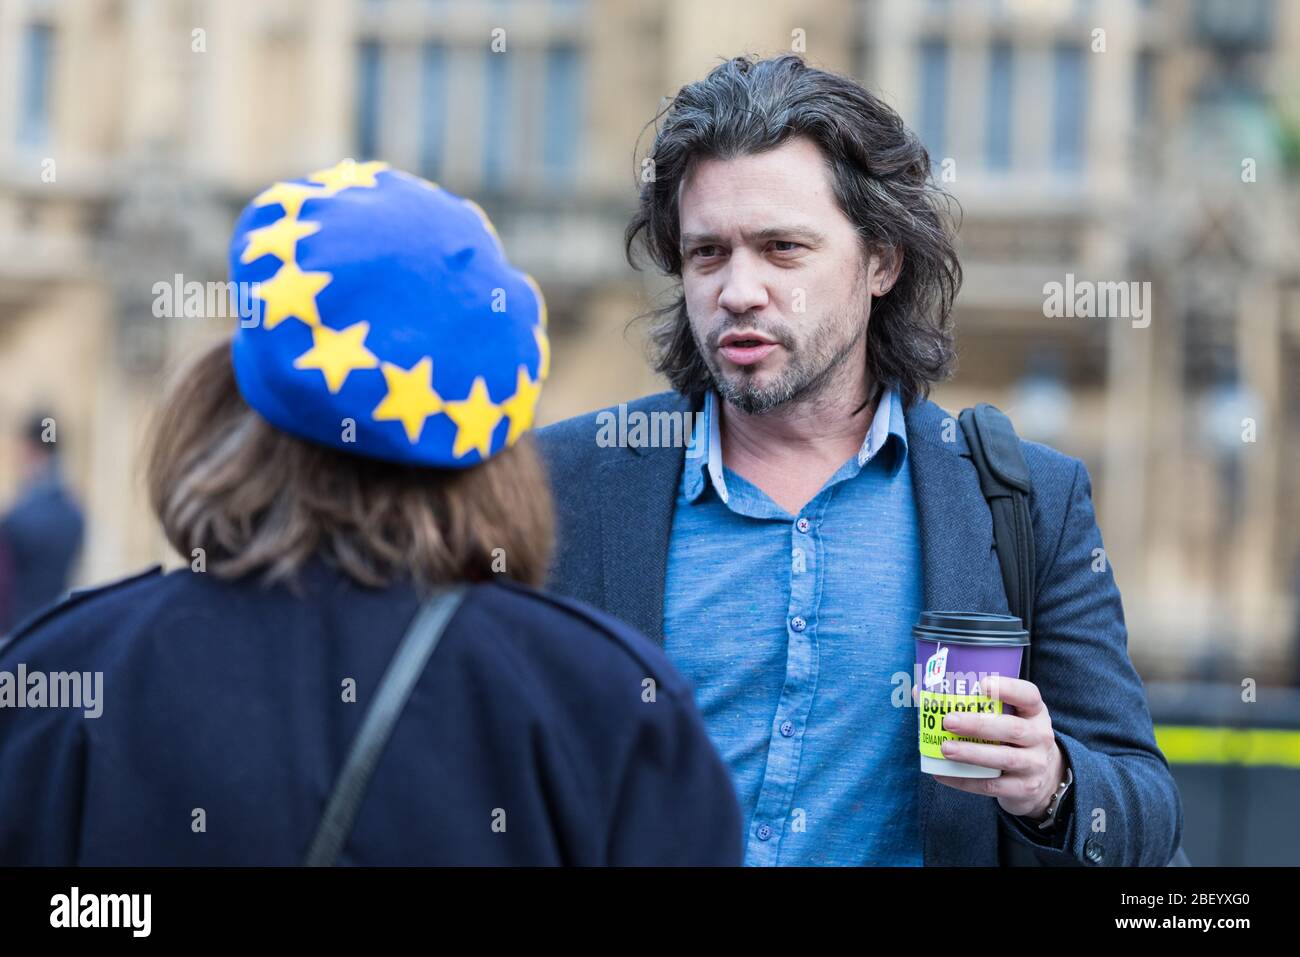 Mike Galsworthy, Scientist and European activist, speaks to a pro EU protester in Westmisnter, London, UK Stock Photo